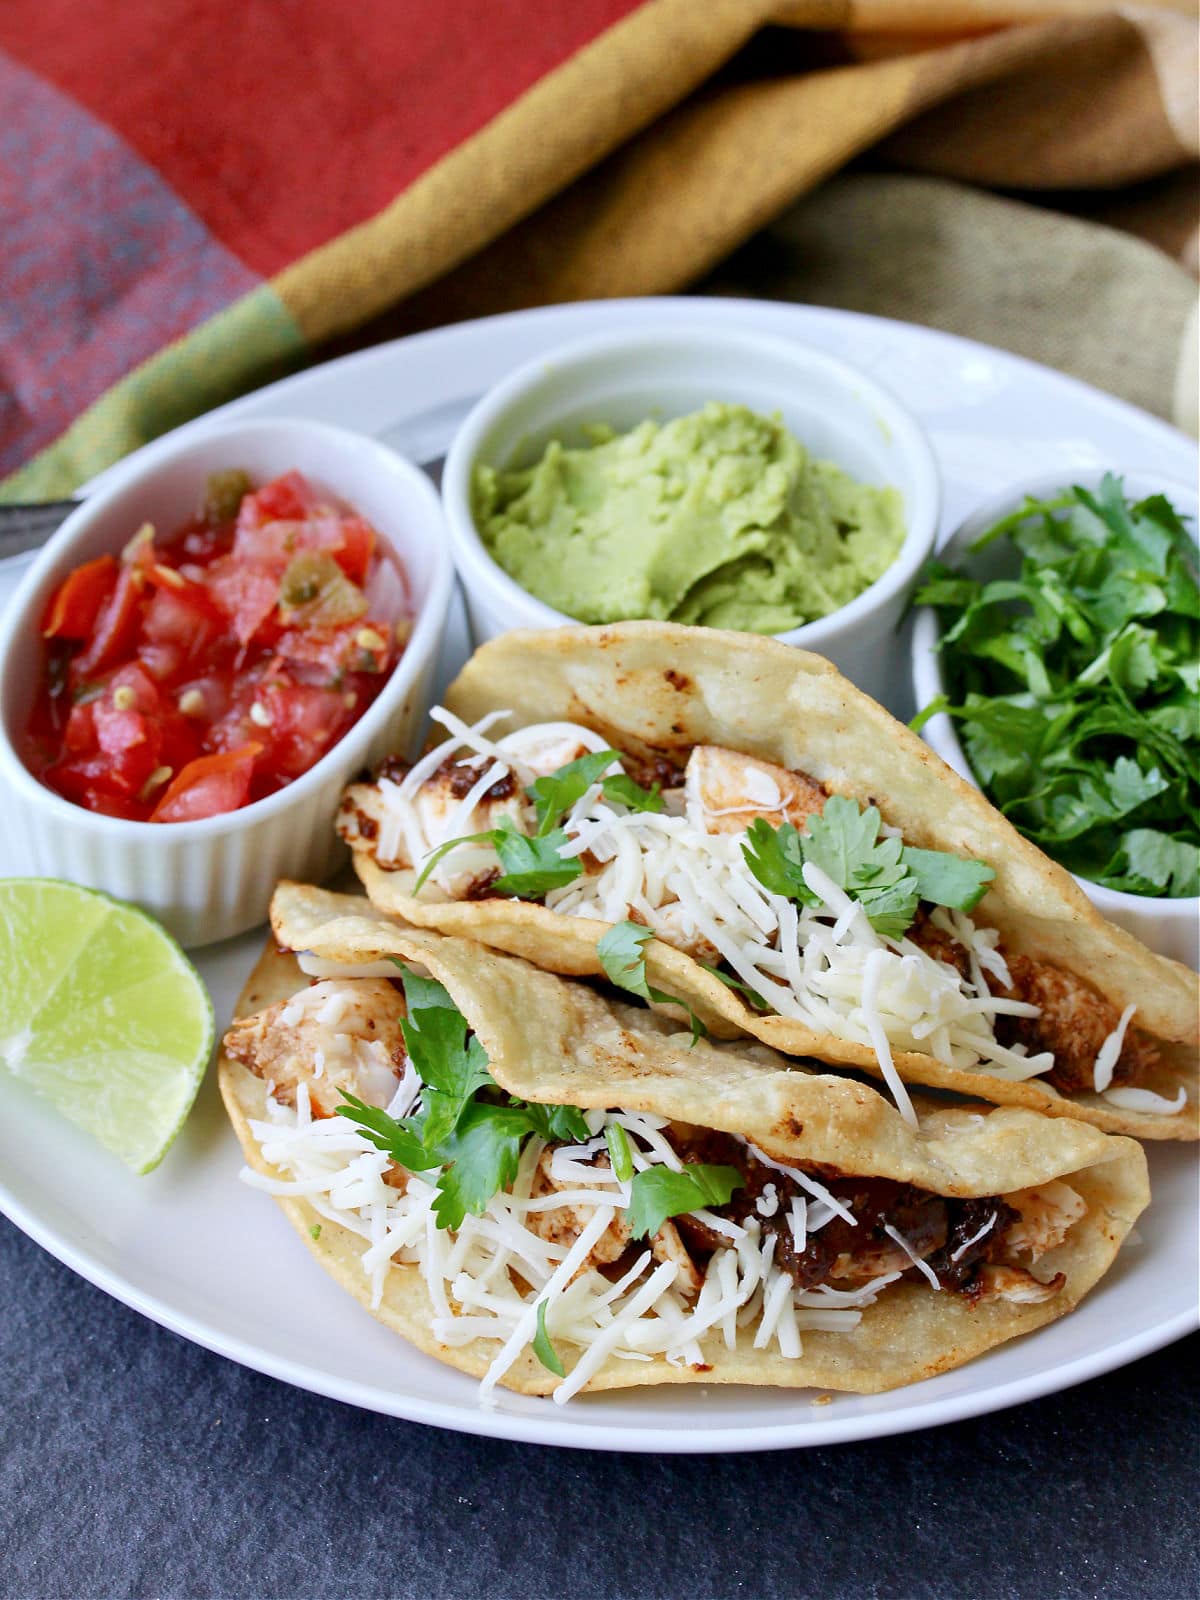 Sous vide Ancho Chili Chicken Tacos.